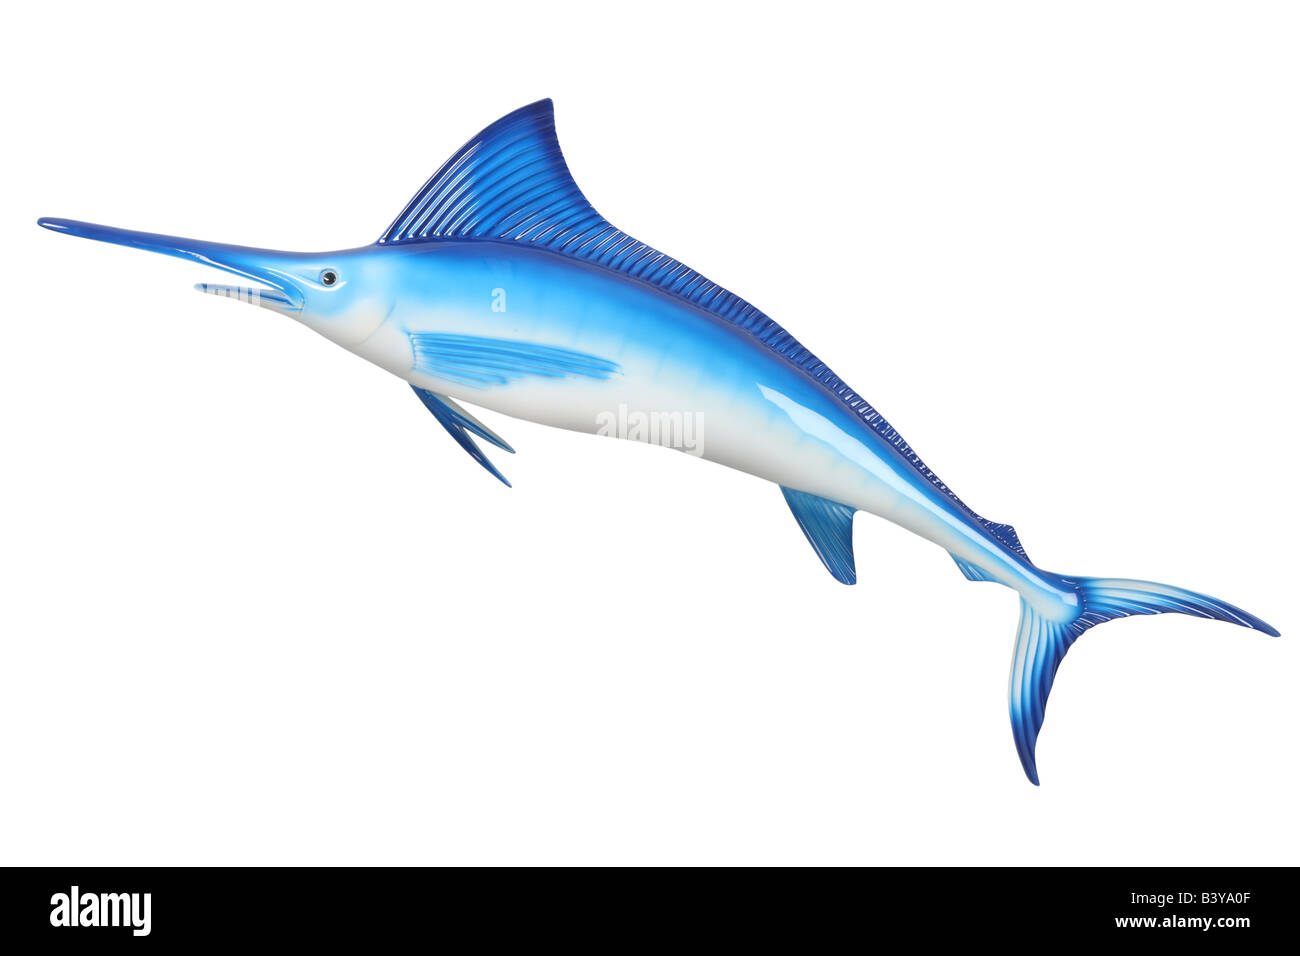 Fake toy marlin cut out isolated on white background Stock Photo